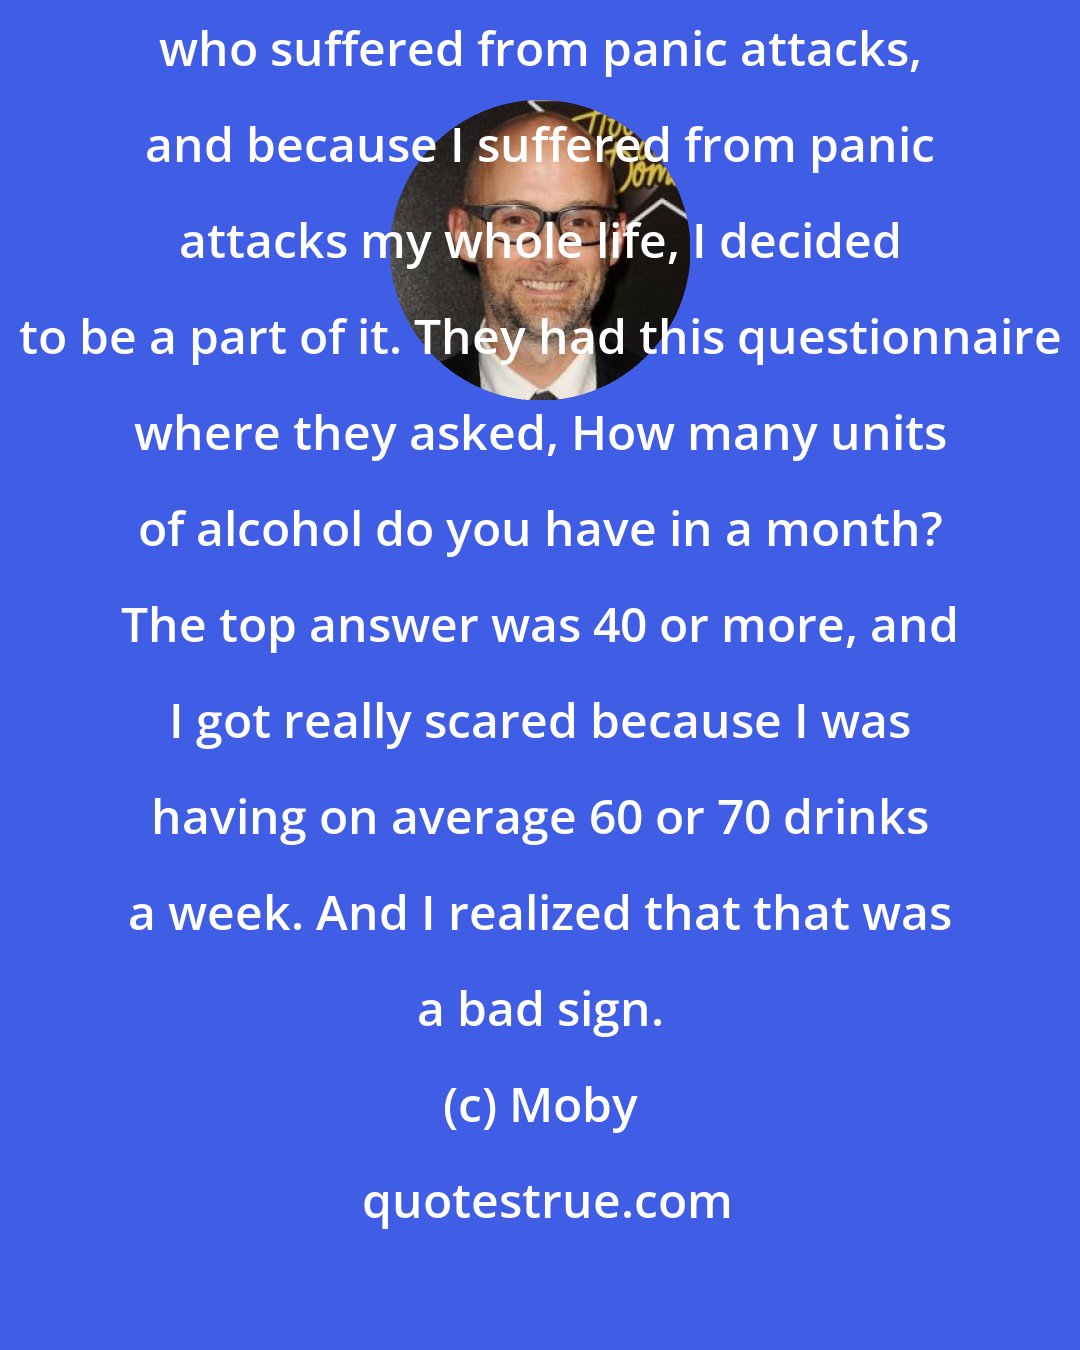 Moby: I went to Columbia University because they were doing a study on people who suffered from panic attacks, and because I suffered from panic attacks my whole life, I decided to be a part of it. They had this questionnaire where they asked, How many units of alcohol do you have in a month? The top answer was 40 or more, and I got really scared because I was having on average 60 or 70 drinks a week. And I realized that that was a bad sign.